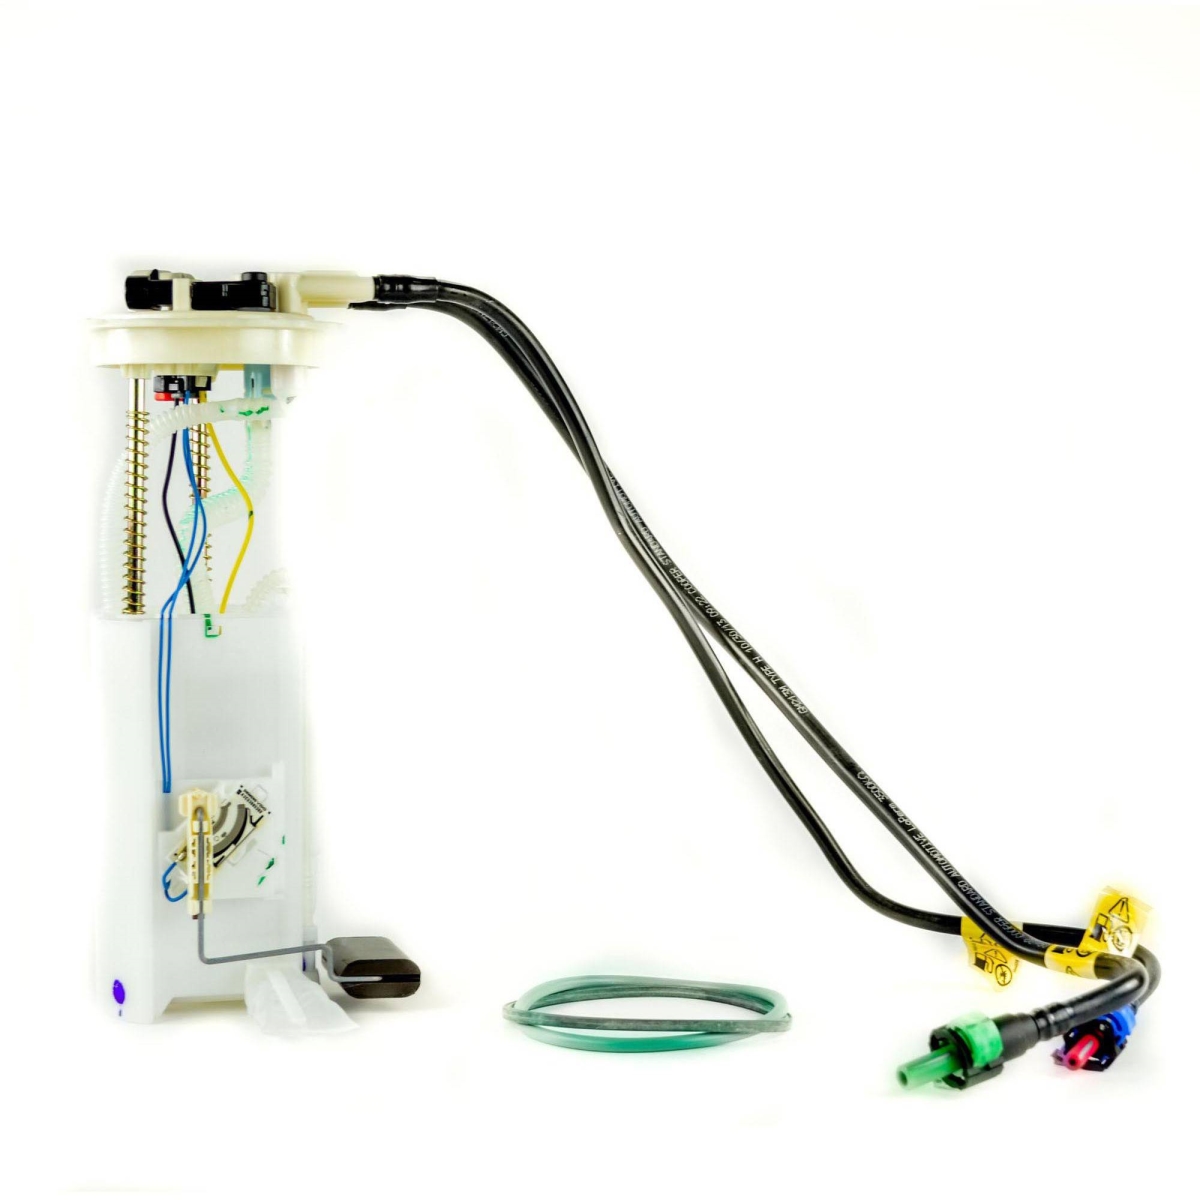 Picture of Ford PFS1031 Fuel Pump & Sender Assembly for 2013-2017 Ford Police Interceptor Sedan